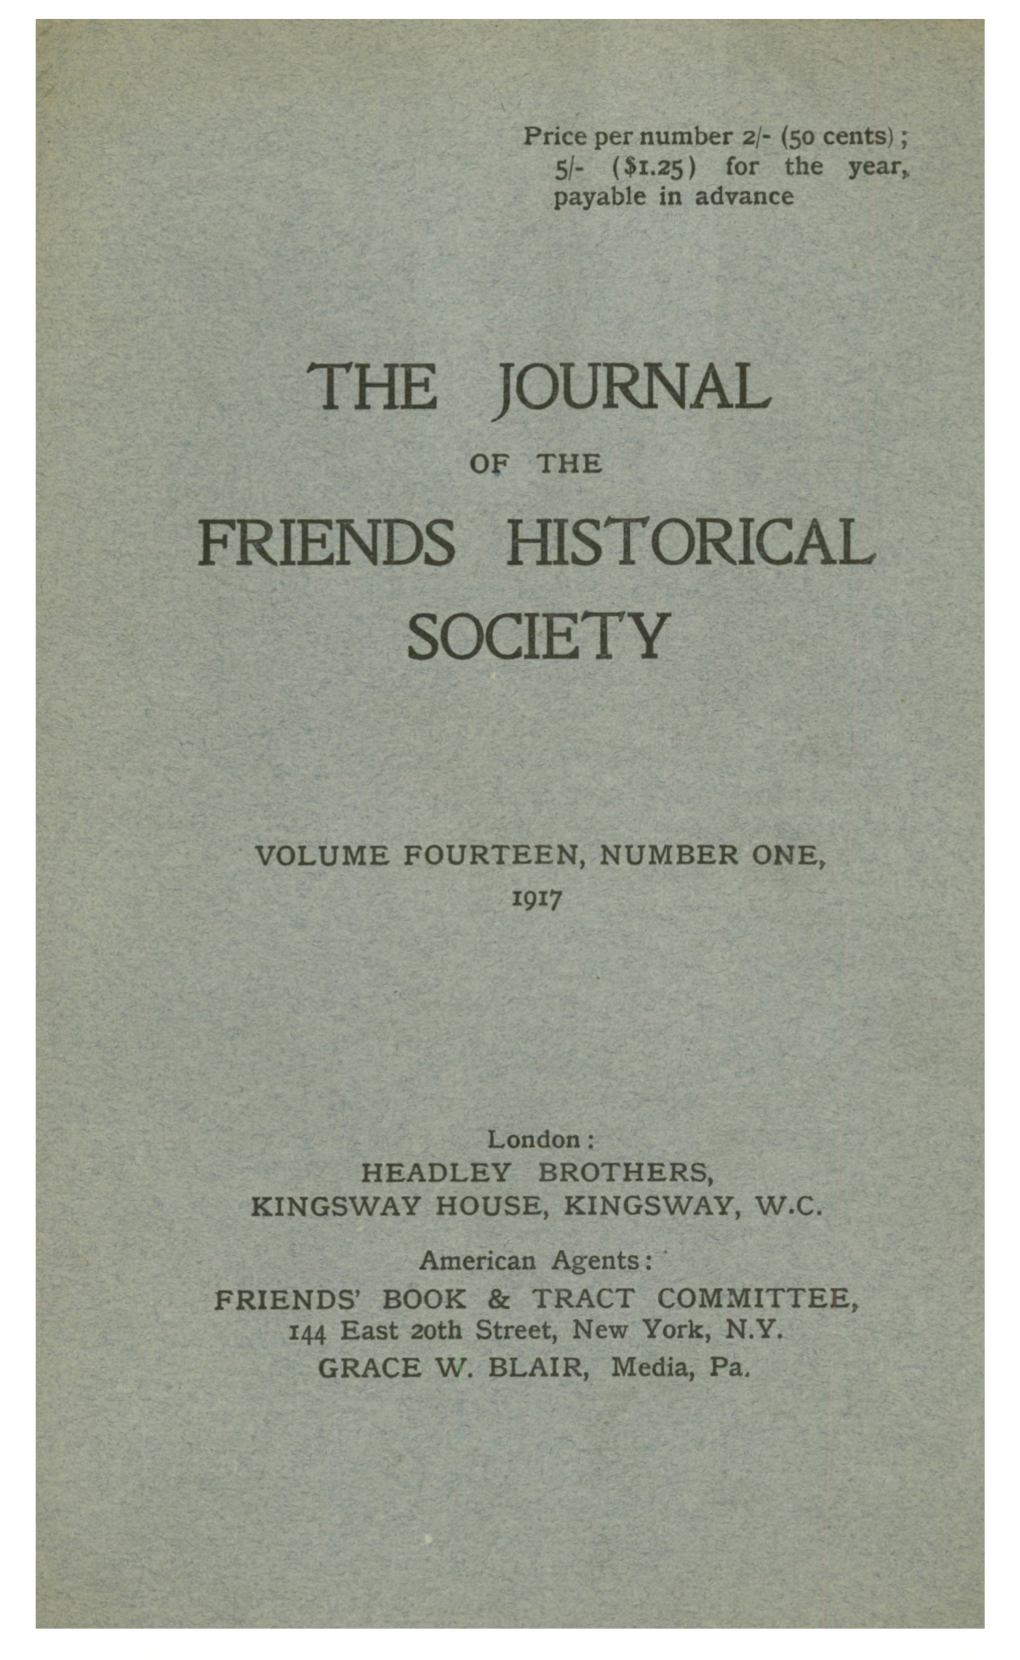 American Agents: FRIENDS' BOOK & TRACT COMMITTEE, 144 East 20Th Street, New York, N.Y